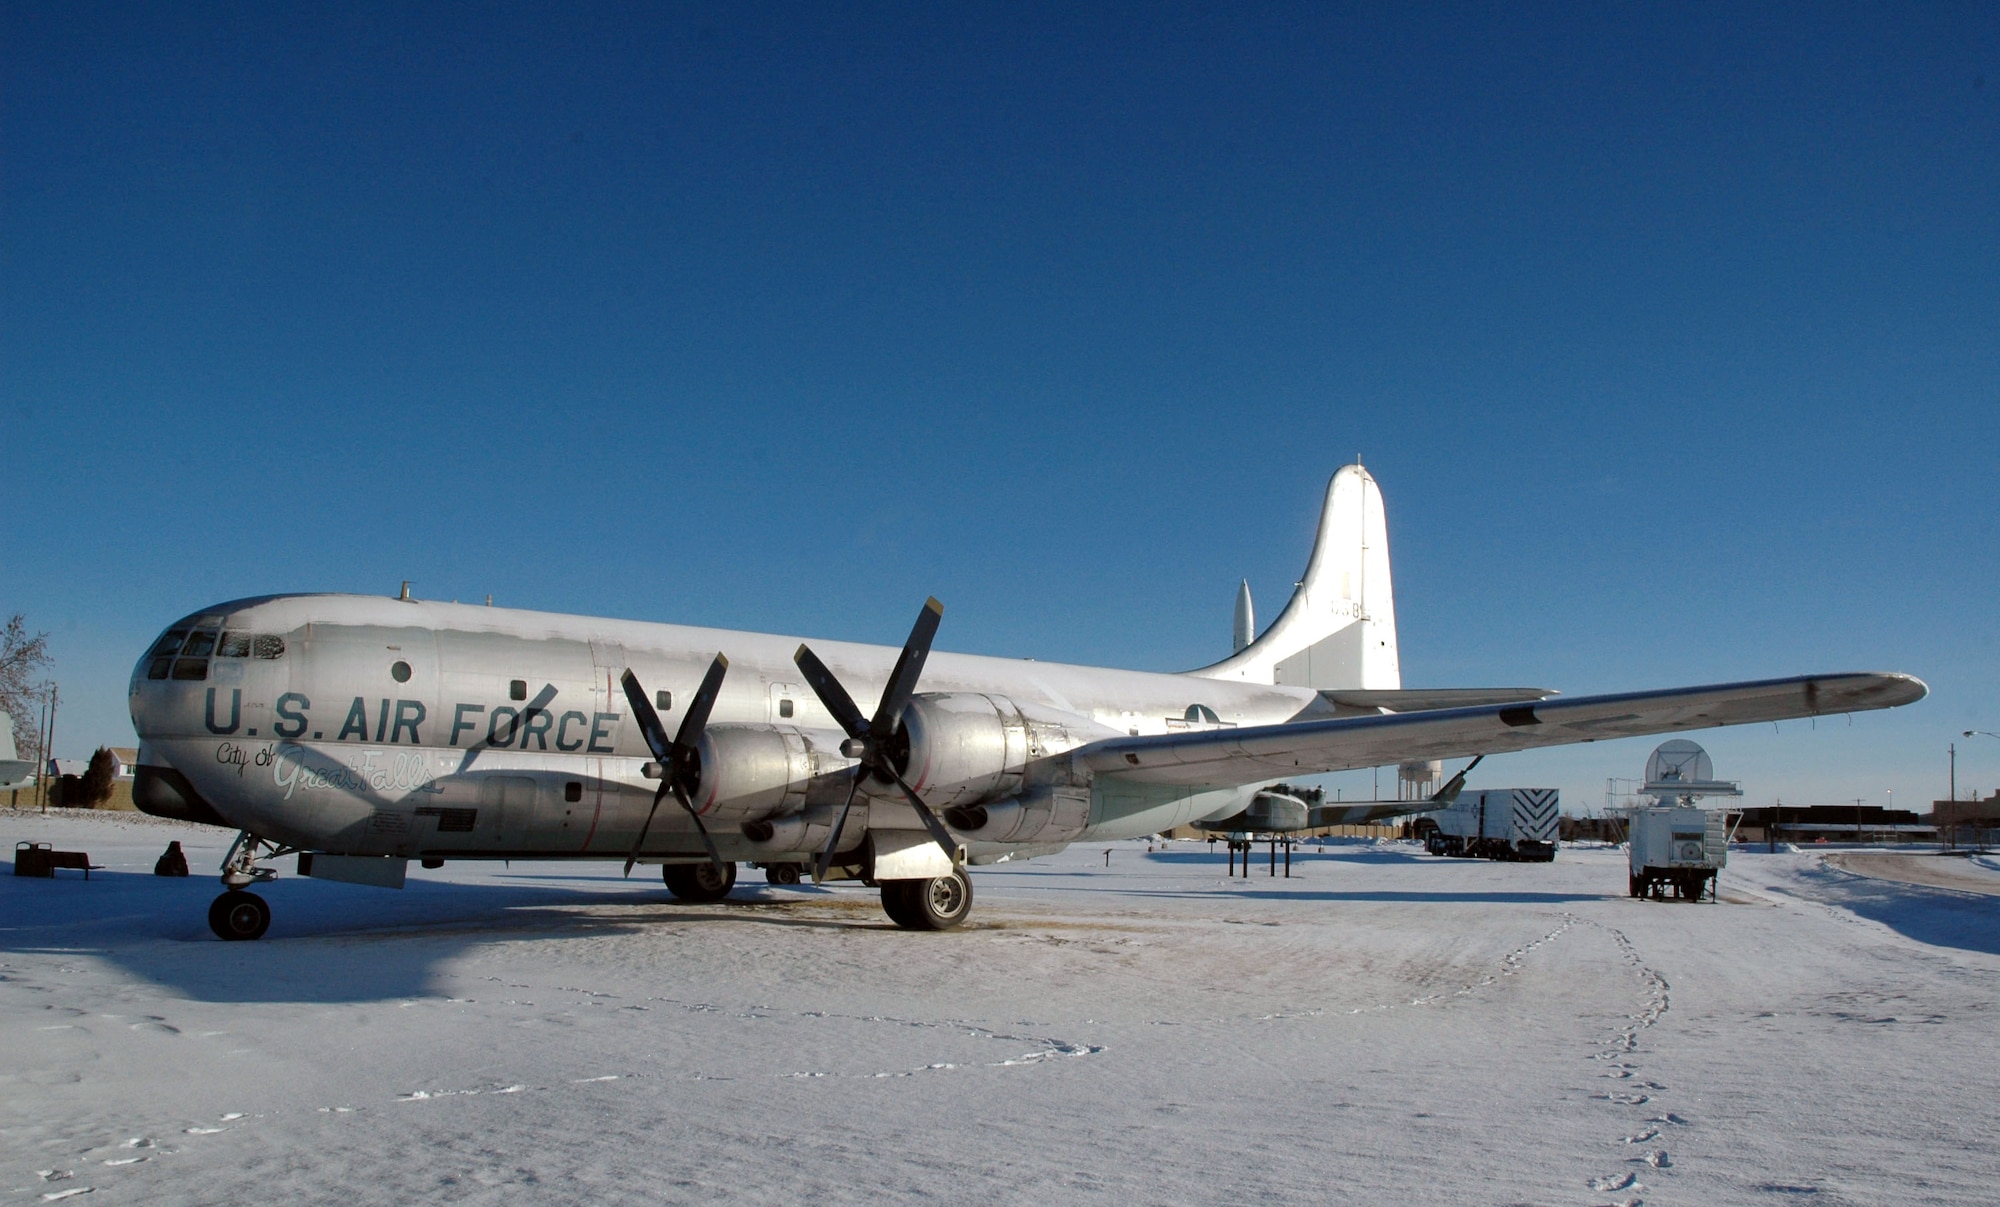 A KC-97G “Stratotanker" is on display at the Malmstrom Museum air park. The air park showcases more than 10 preserved aircraft, vehicles and weapons systems near the 2nd Avenue N. gate. The museum is open Monday to Friday from 10 a.m. to 4 p.m. (U.S. Air force photo/Airman 1st Class Dillon White)